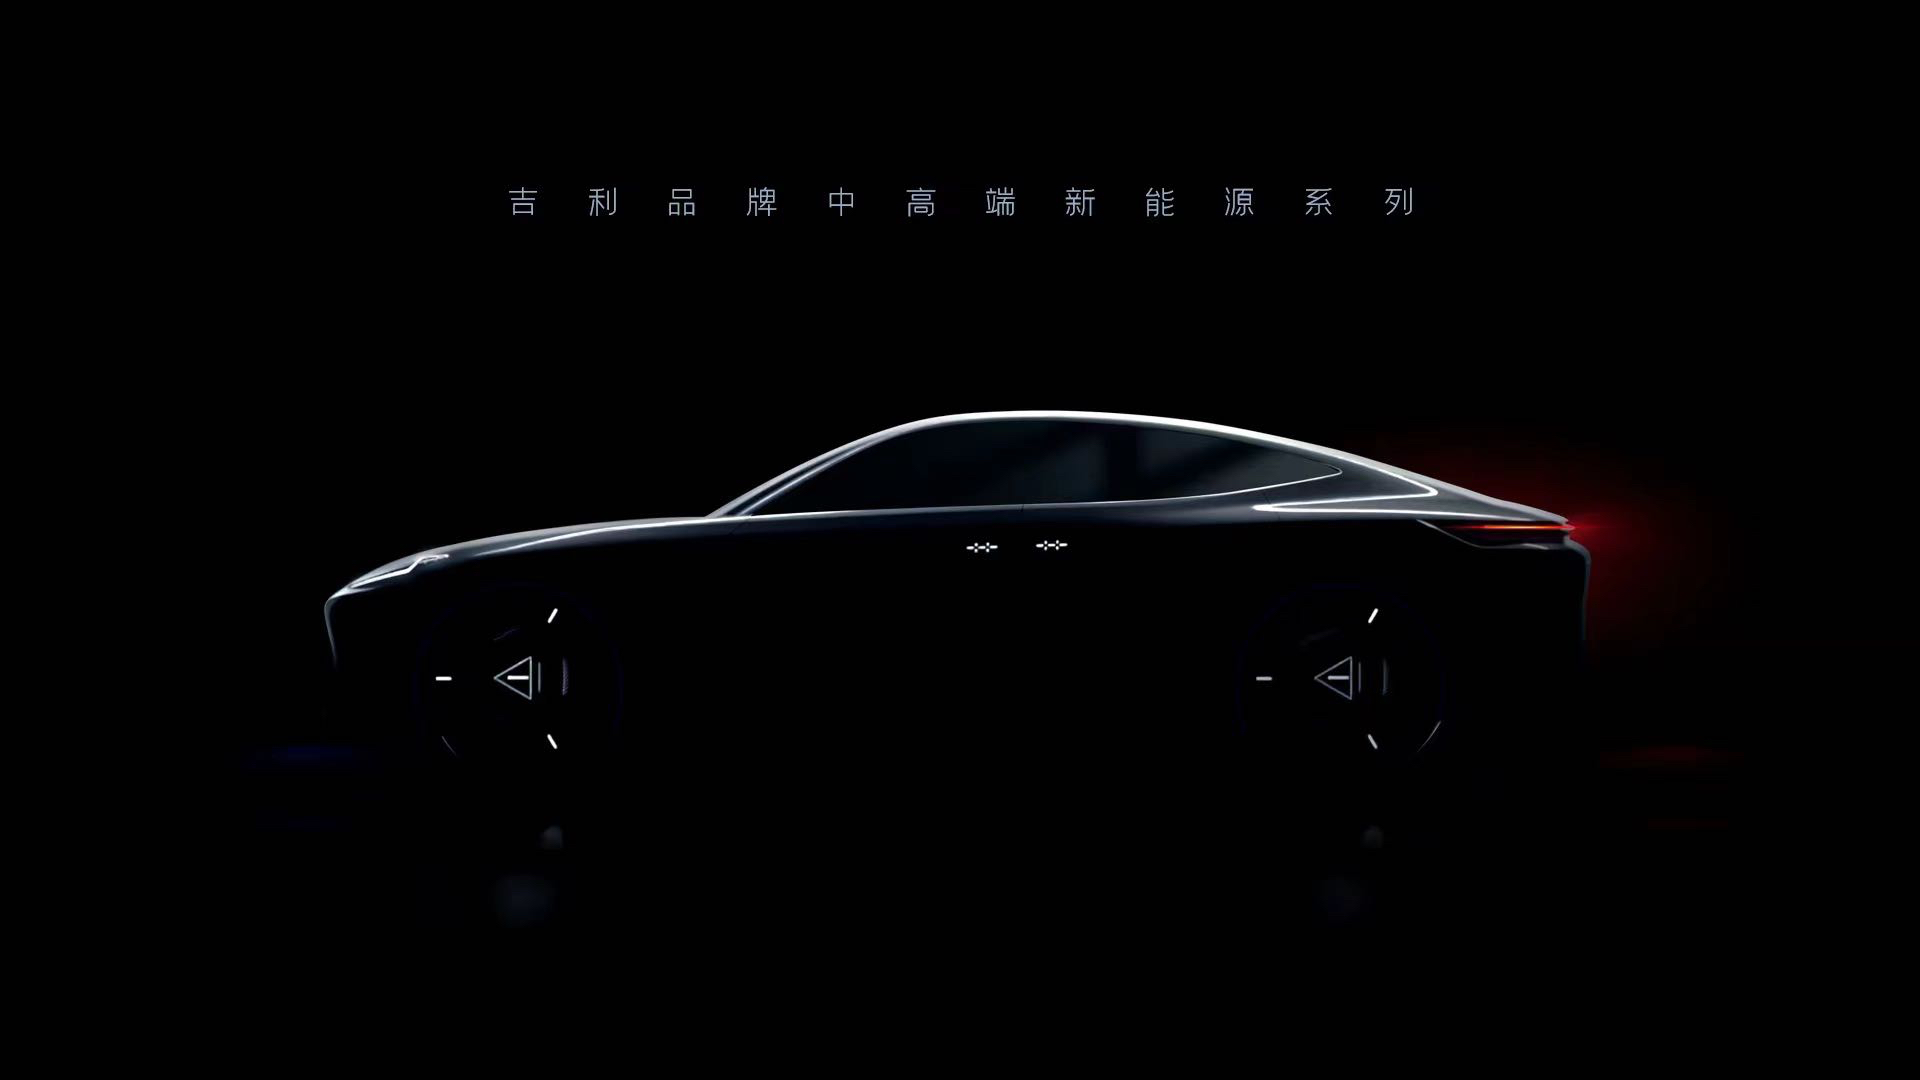 Geely will launch a brand-new mid-to-high-end new energy vehicle series in 2023.